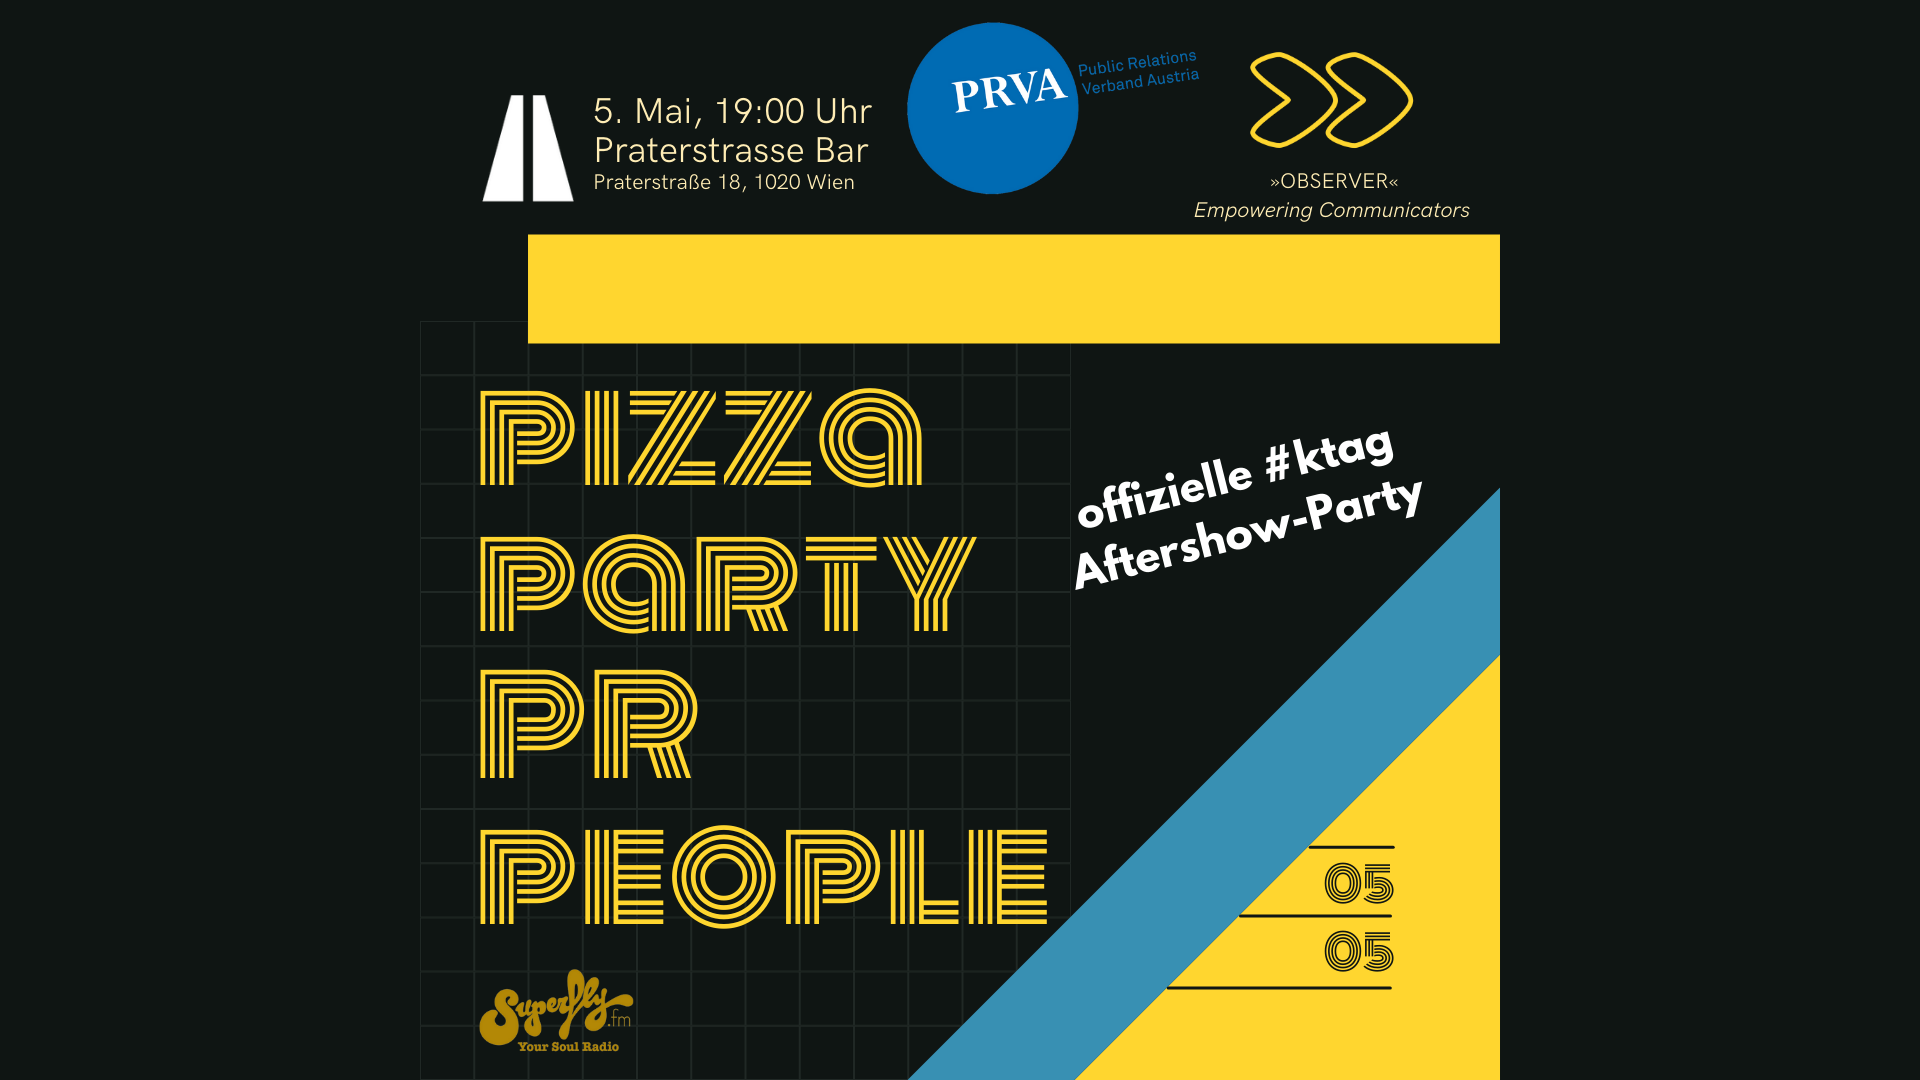 OBSERVER Eventreihe "Pizza, Party, PR, People"